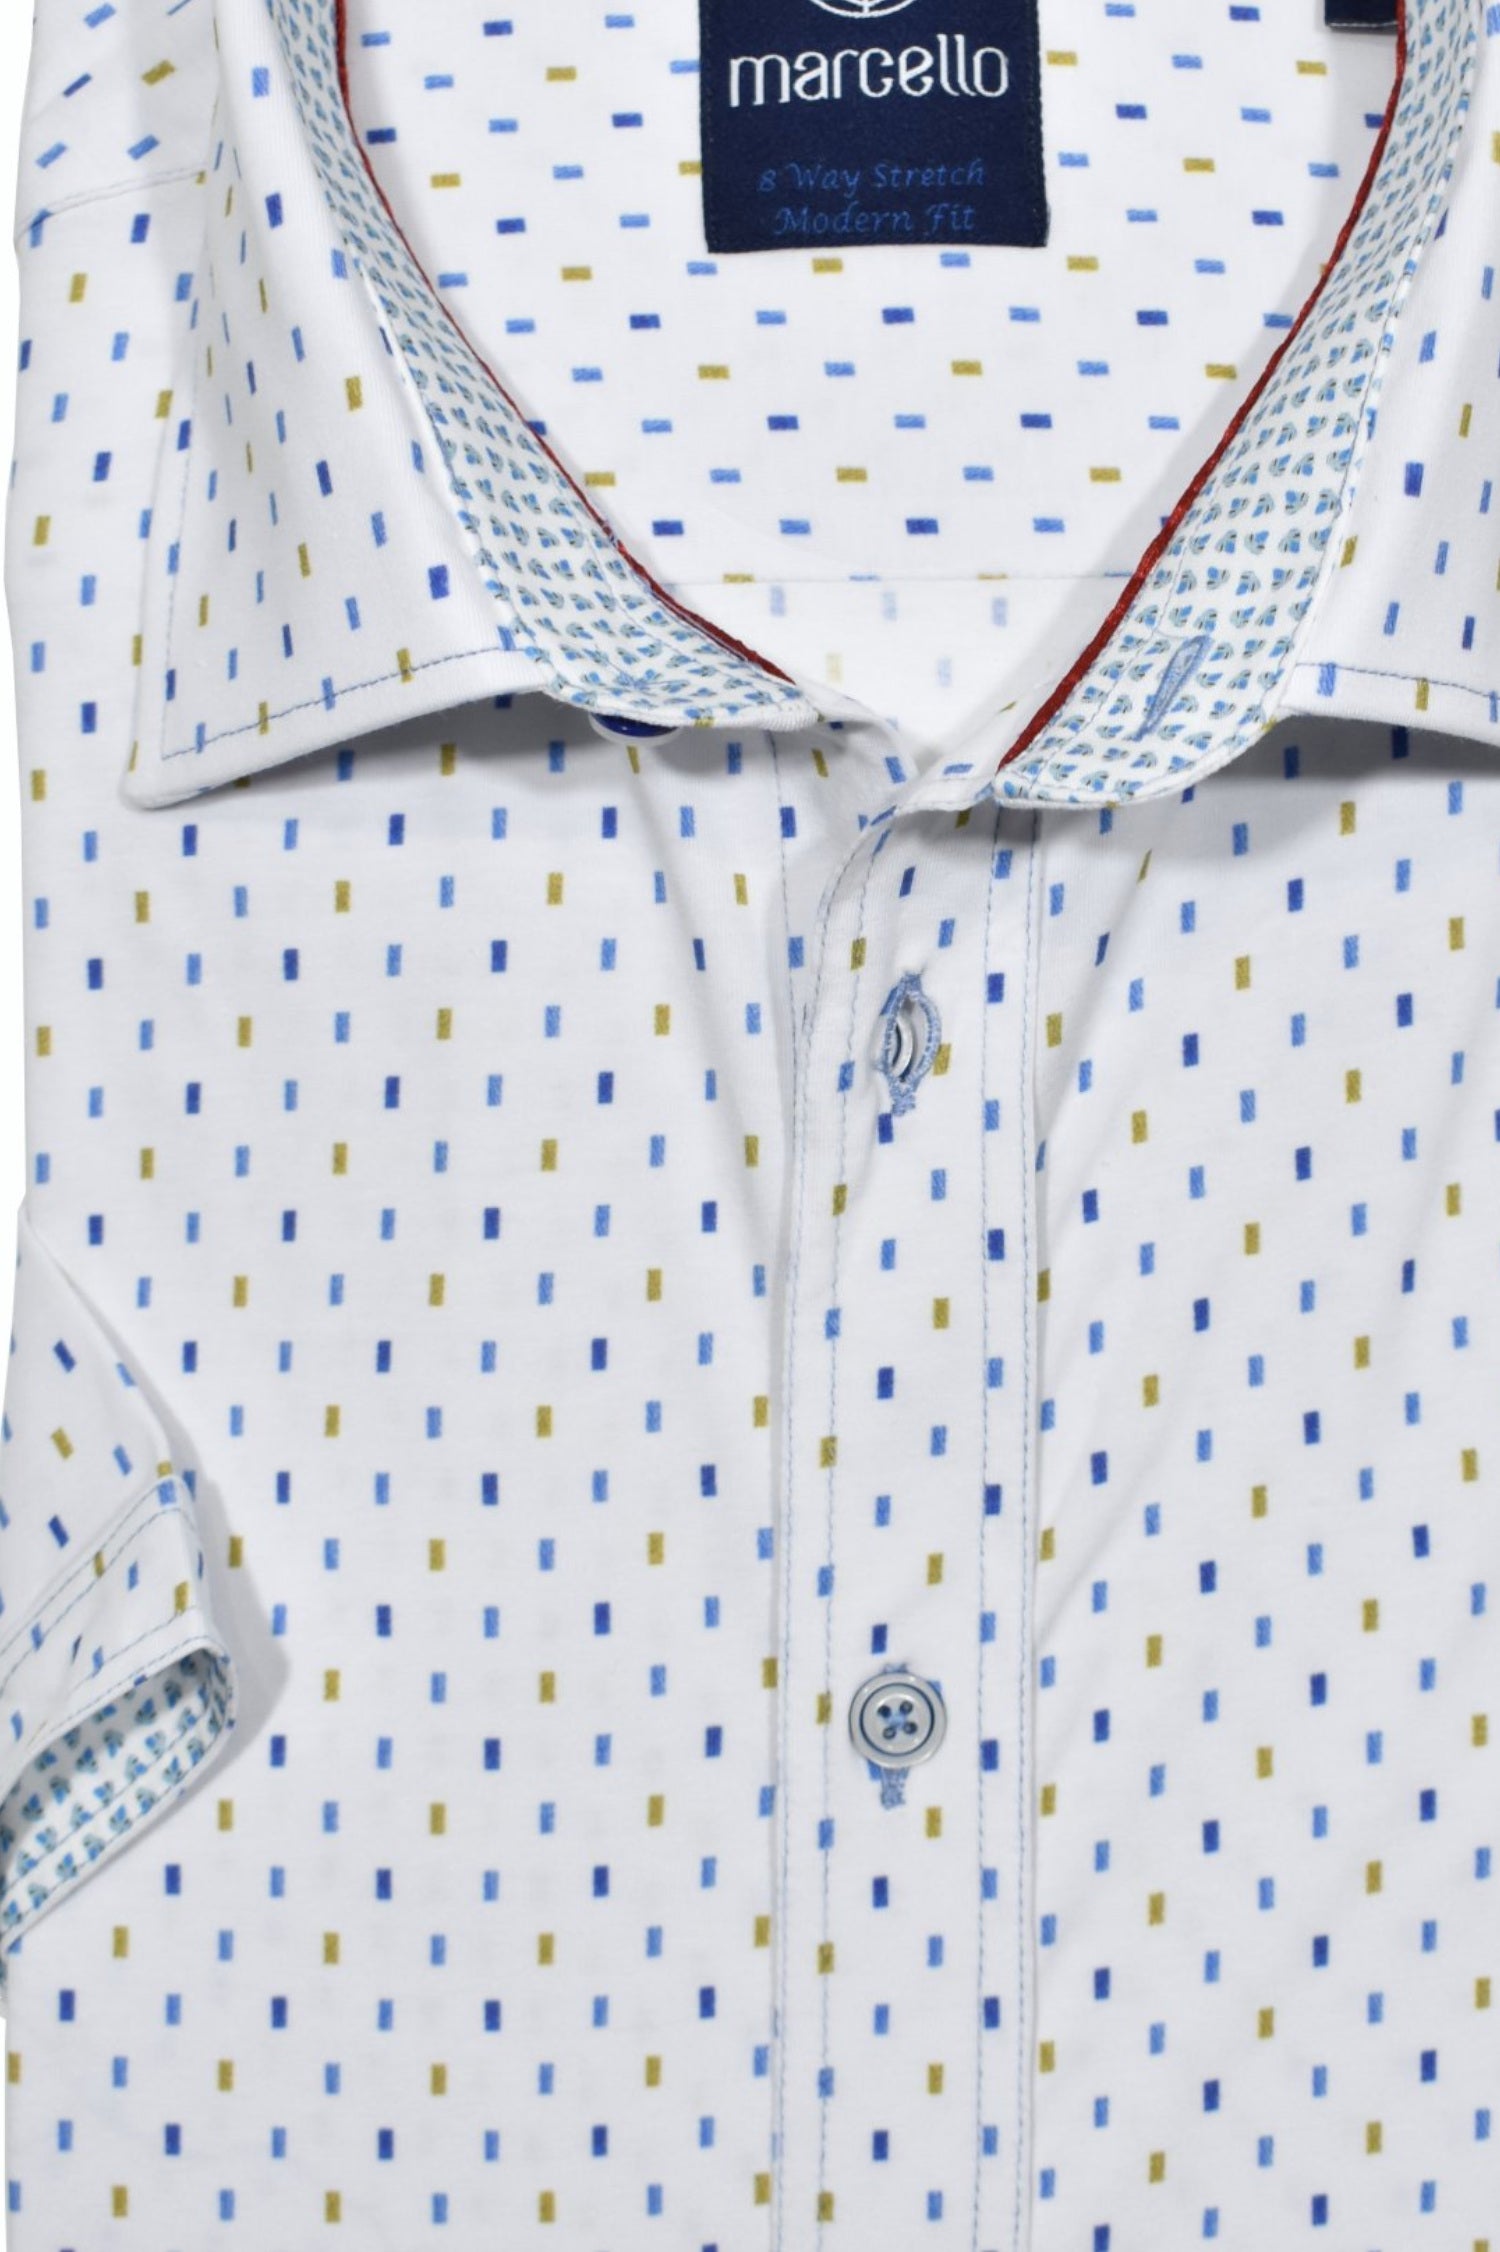 Sometimes a simple and clean pattern is just what is needed. The Marcello W804S Chiclet shirt features a clean pattern that works well with shorts, pants or jeans. Custom detailing and a soft cotton fabric, along with signature double track contrast stitch work completes the look.